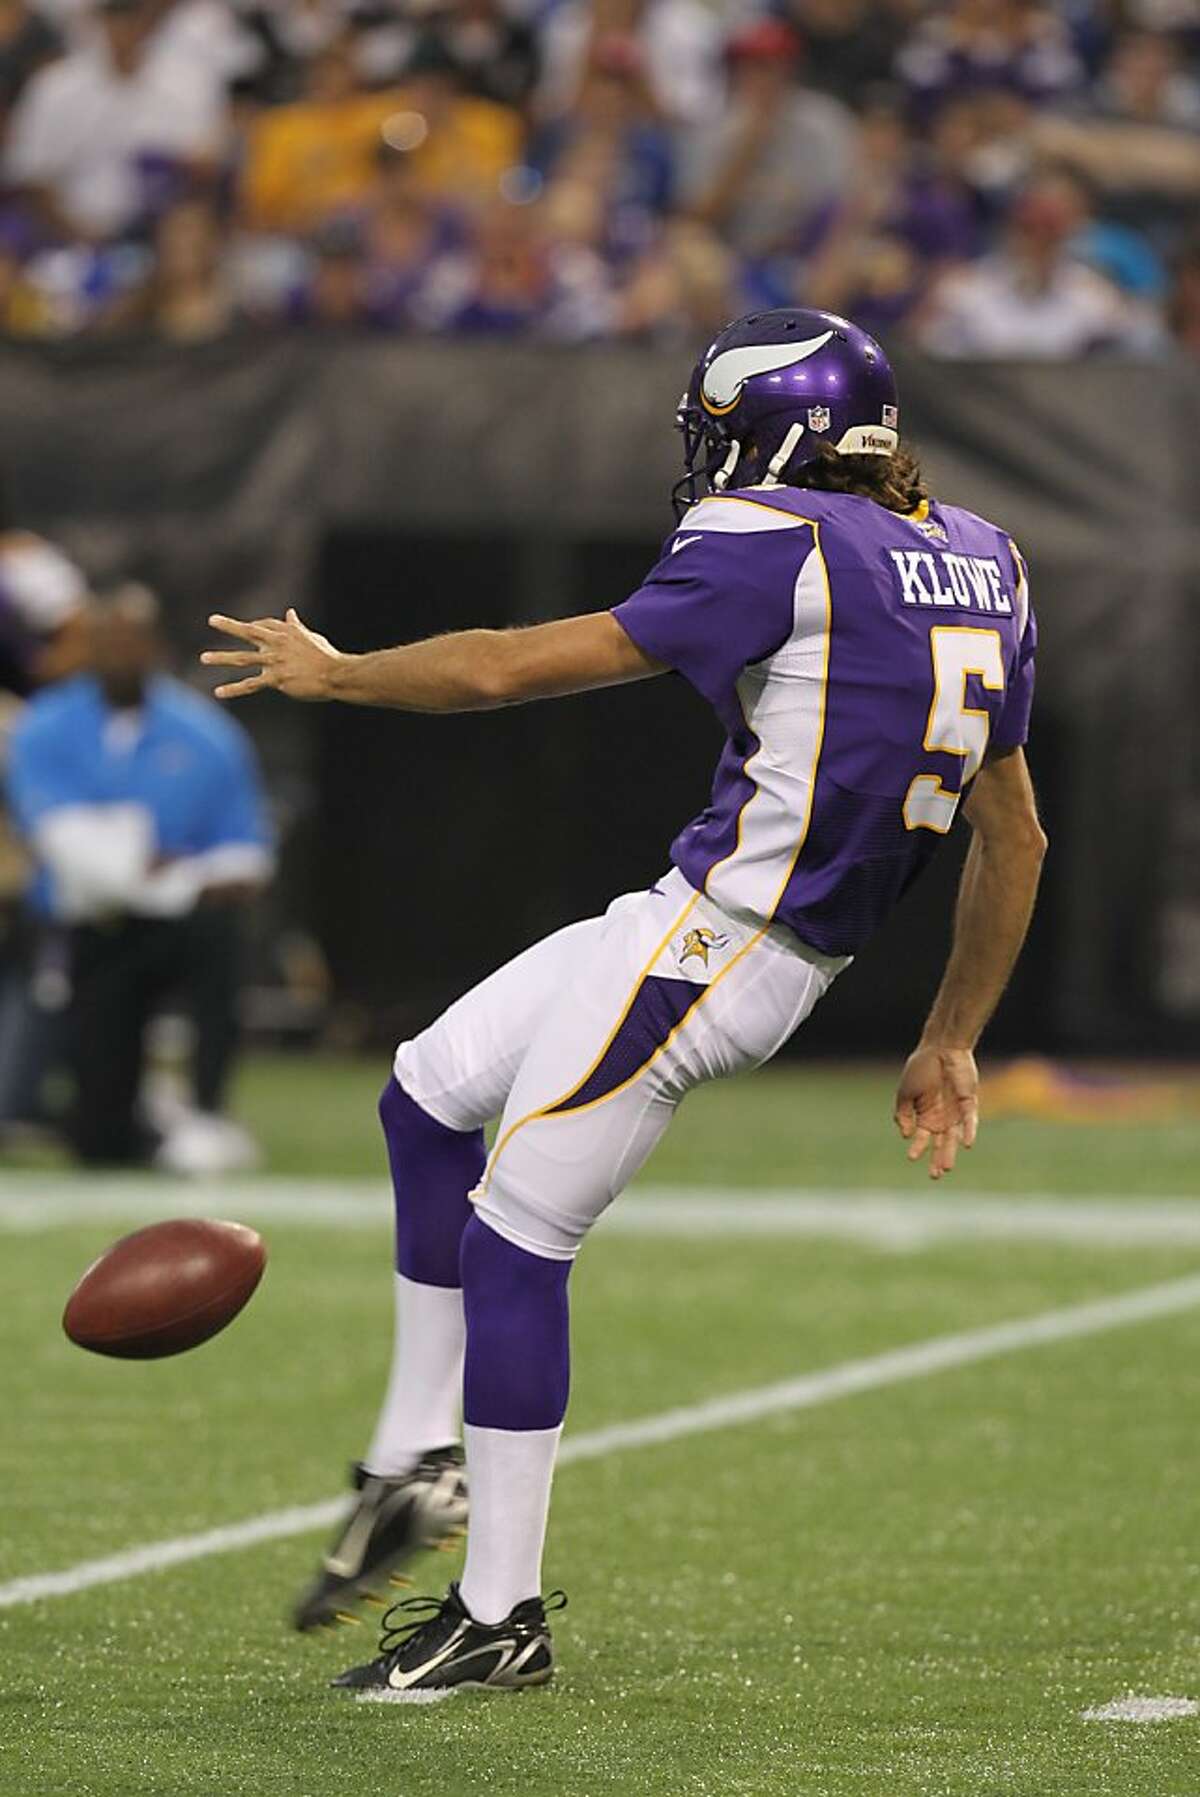 Minnesota Vikings punter Chris Kluwe (5) kicks in the first half of an NFL preseason football game against the San Diego Chargers Friday, Aug. 24, 2012 in Minneapolis. (AP Photo/Genevieve Ross)